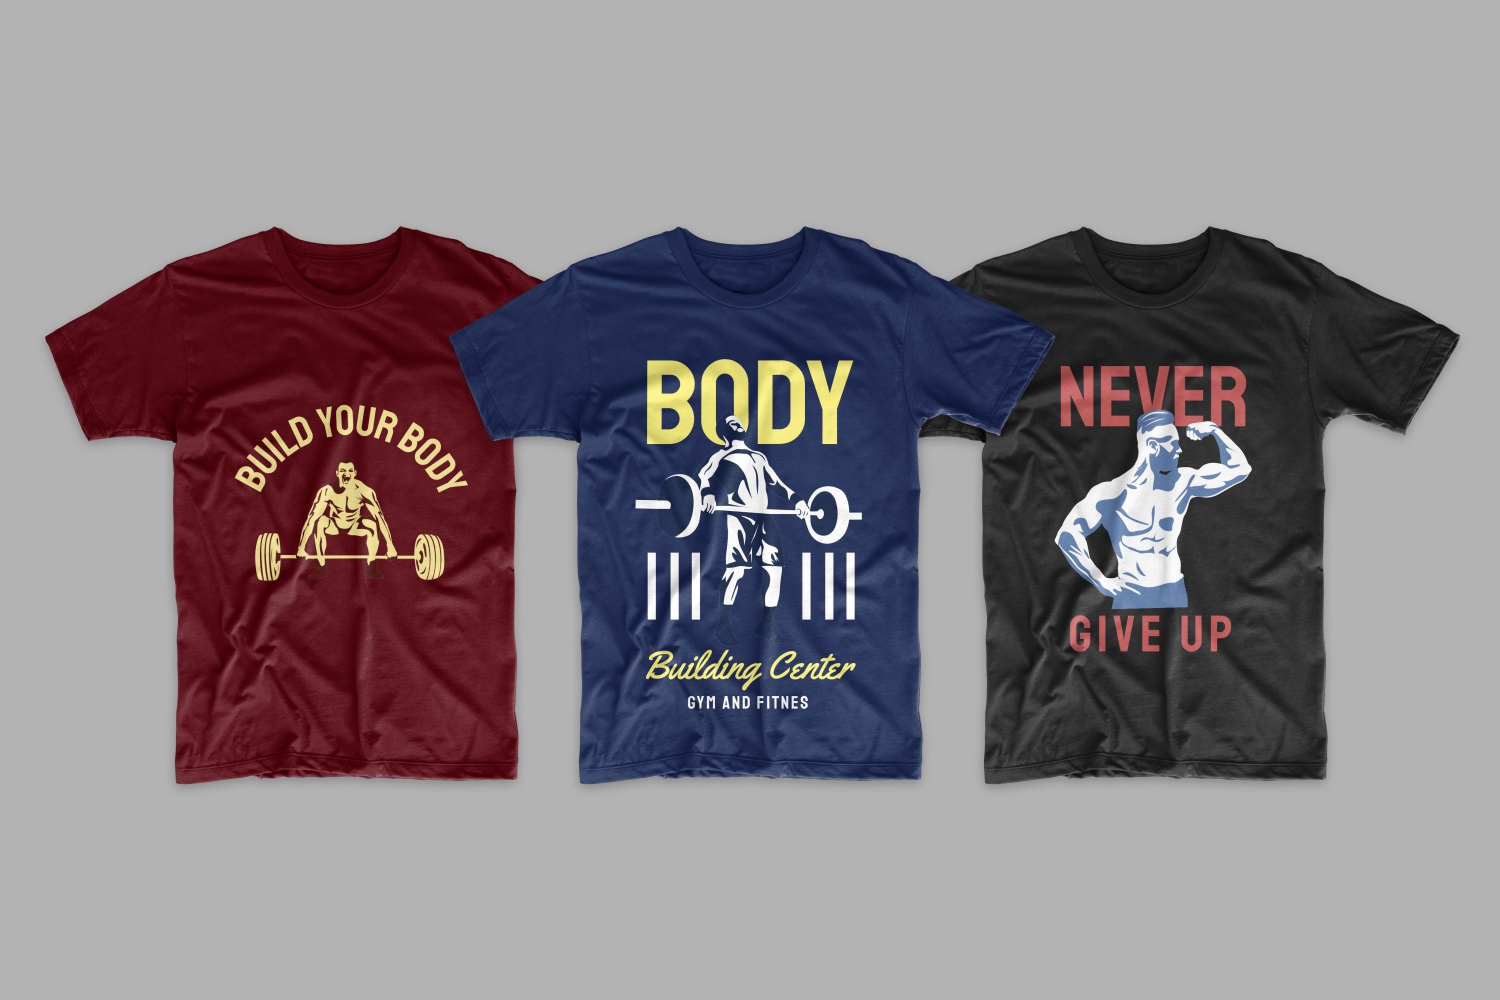 T-shirts with motivational phrases.